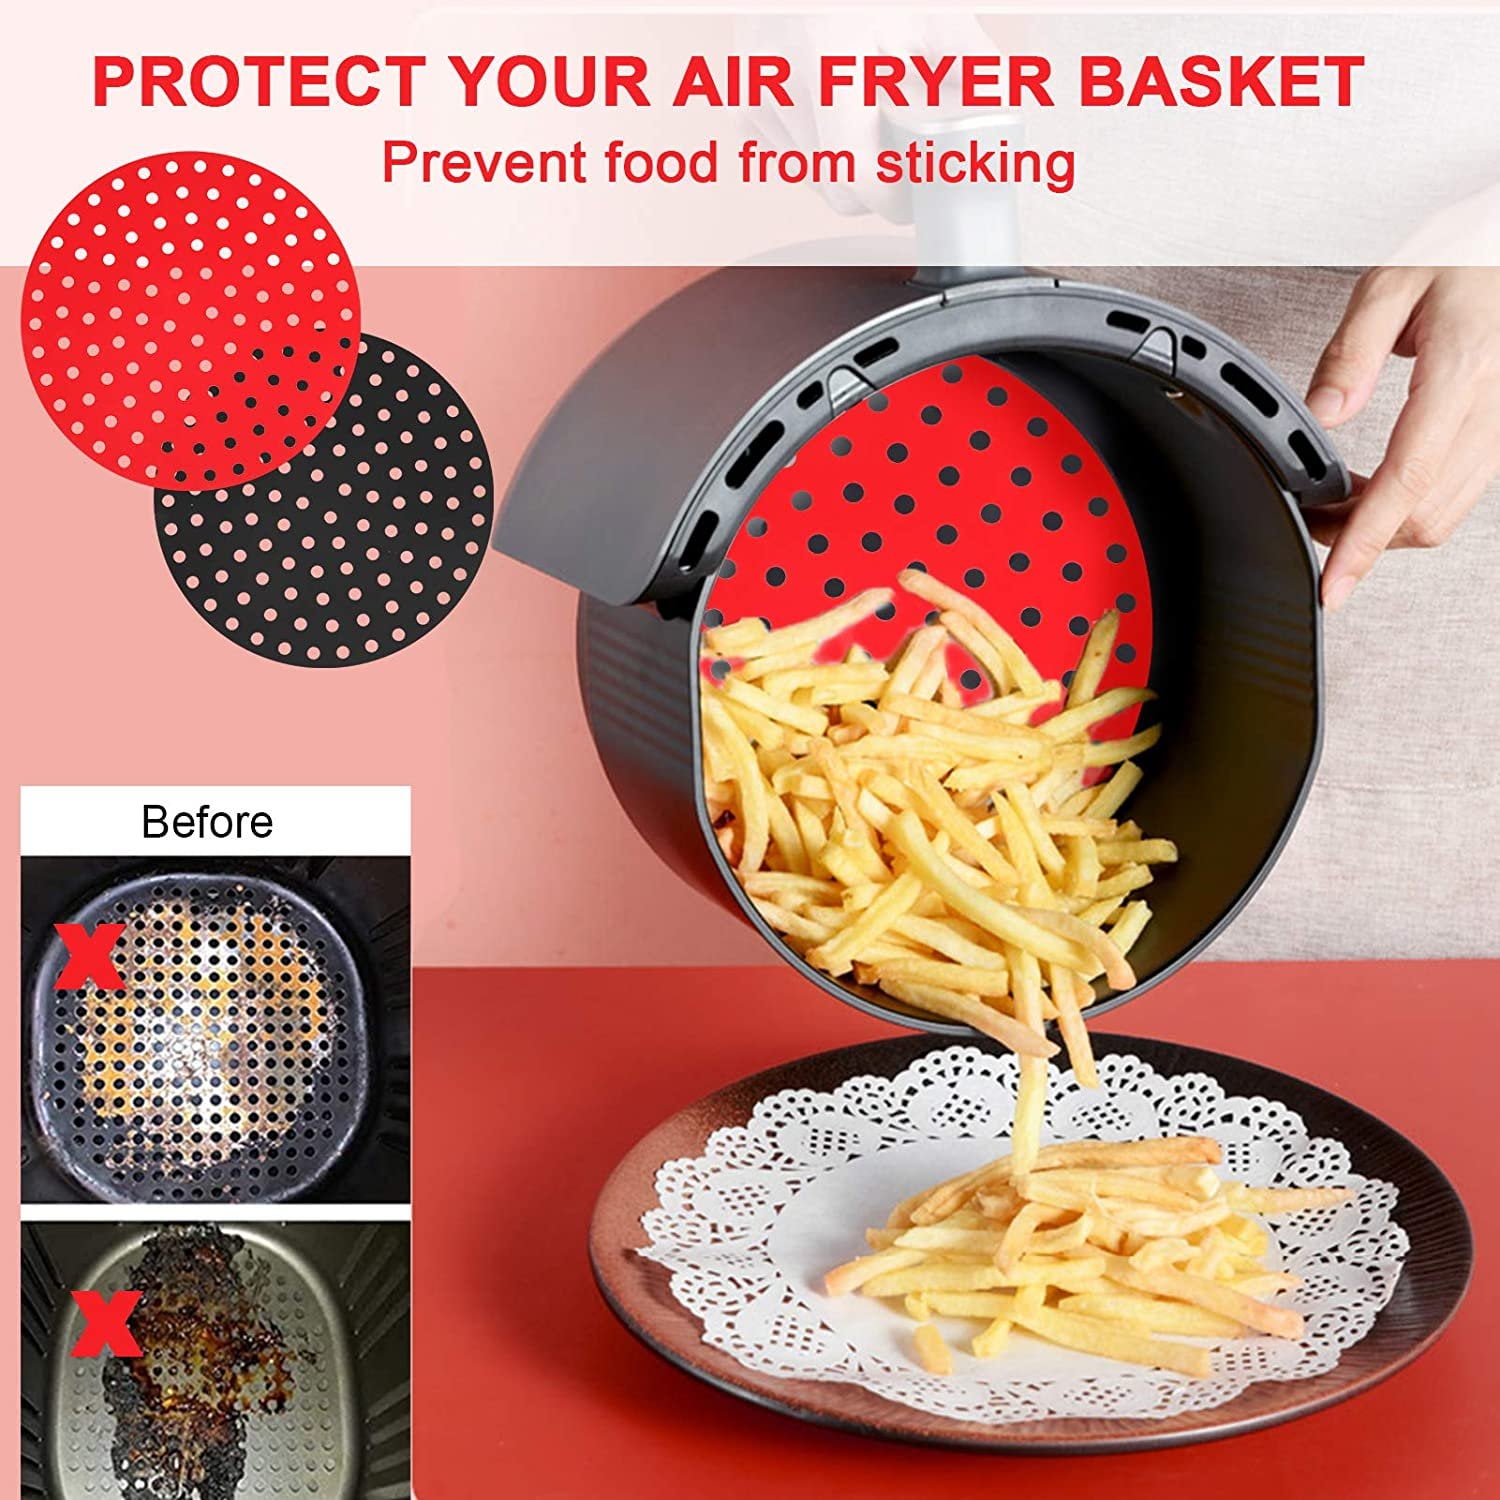 How to Prevent Food from Sticking to Your Air Fryer Basket